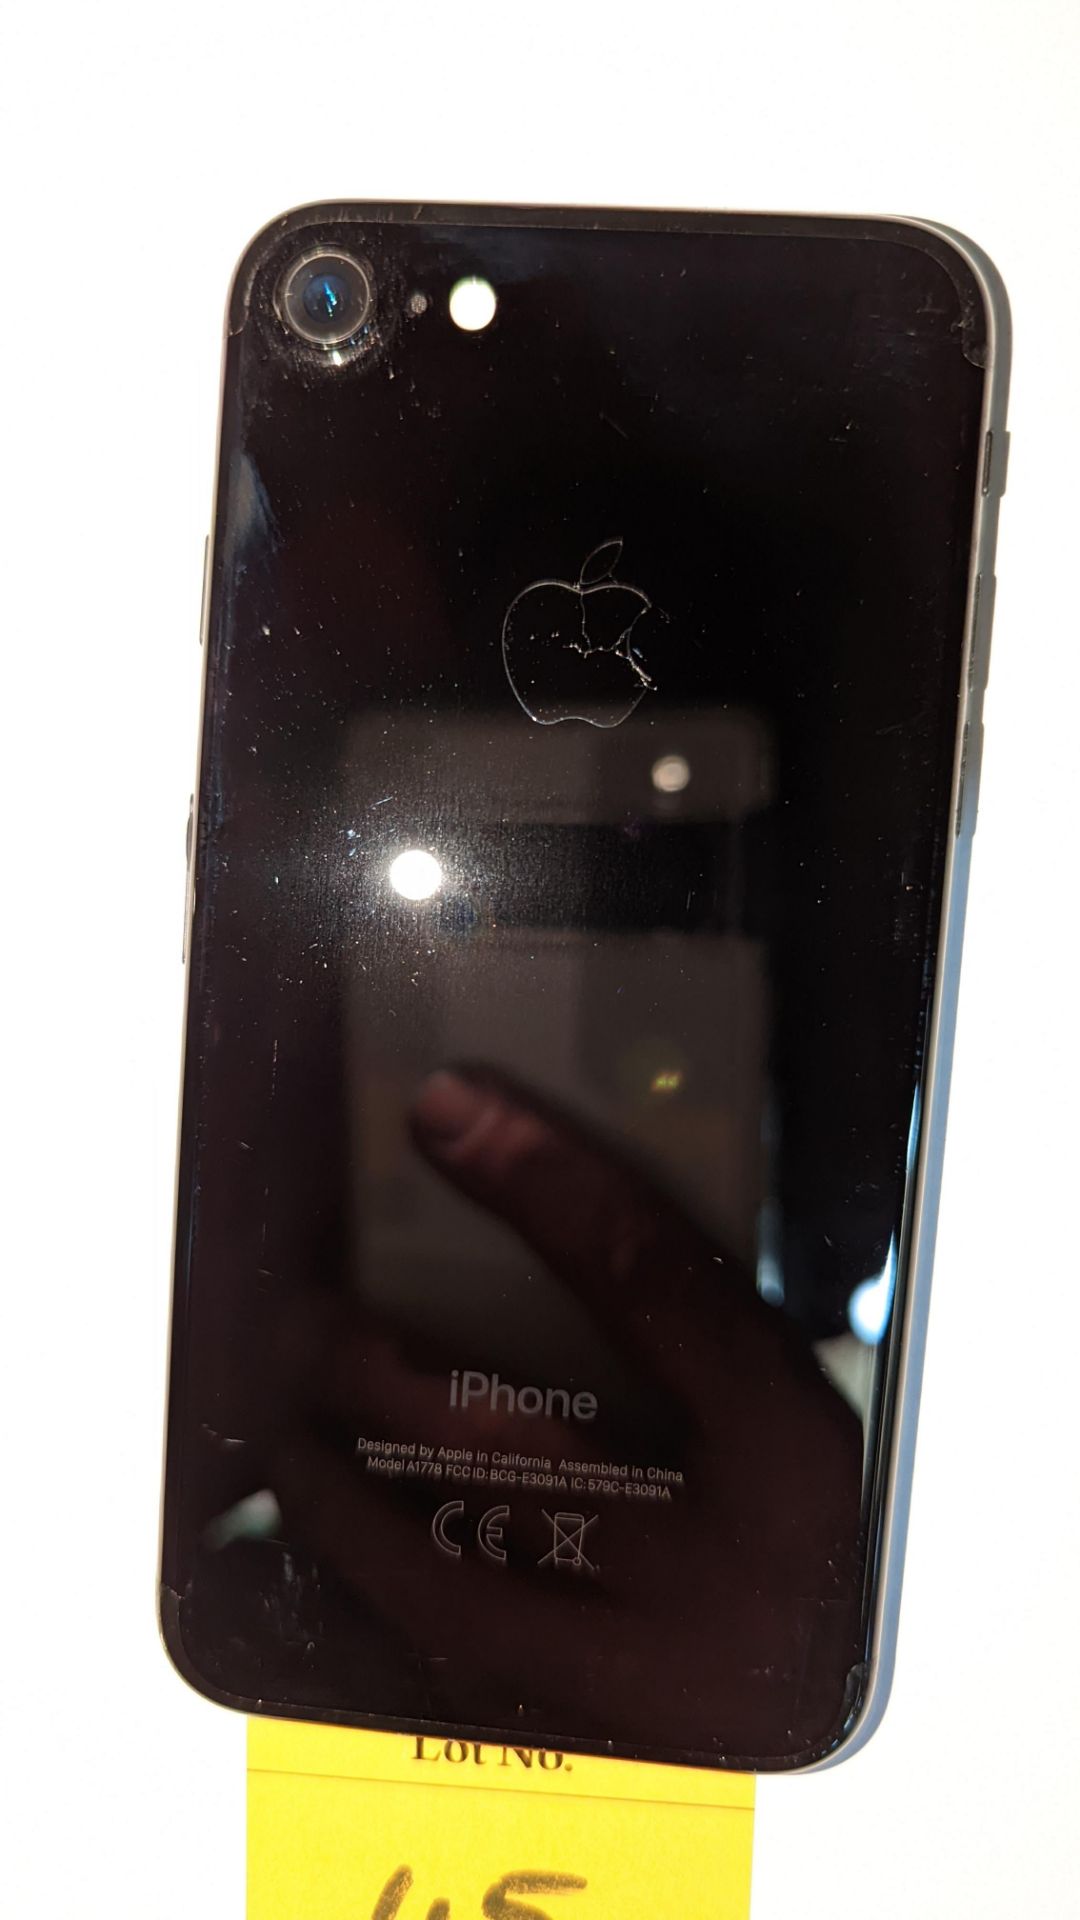 Apple iPhone 7, 32GB capacity, model A1778. No ancillaries or accessories - Image 11 of 16